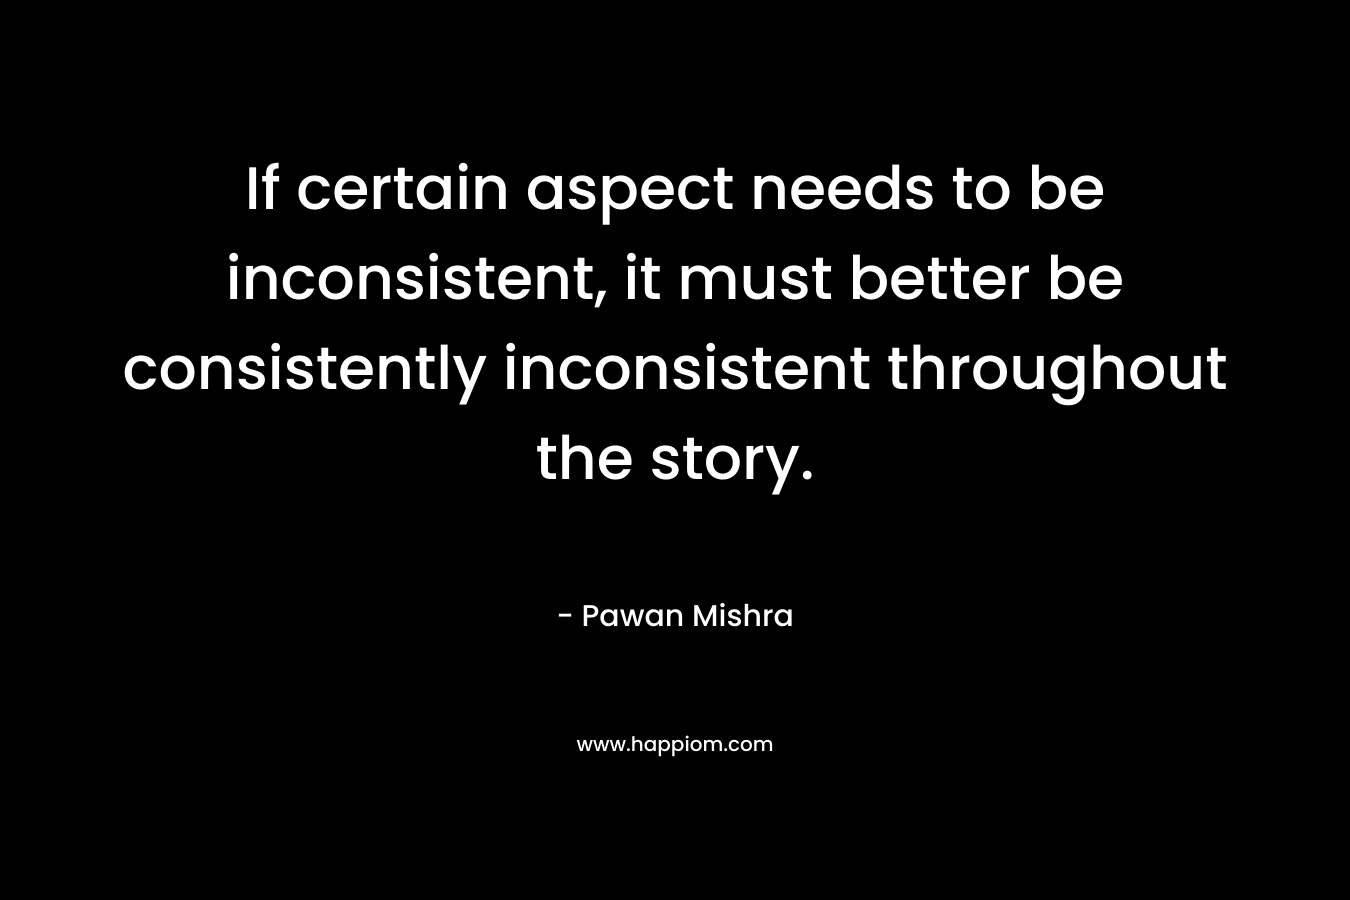 If certain aspect needs to be inconsistent, it must better be consistently inconsistent throughout the story.